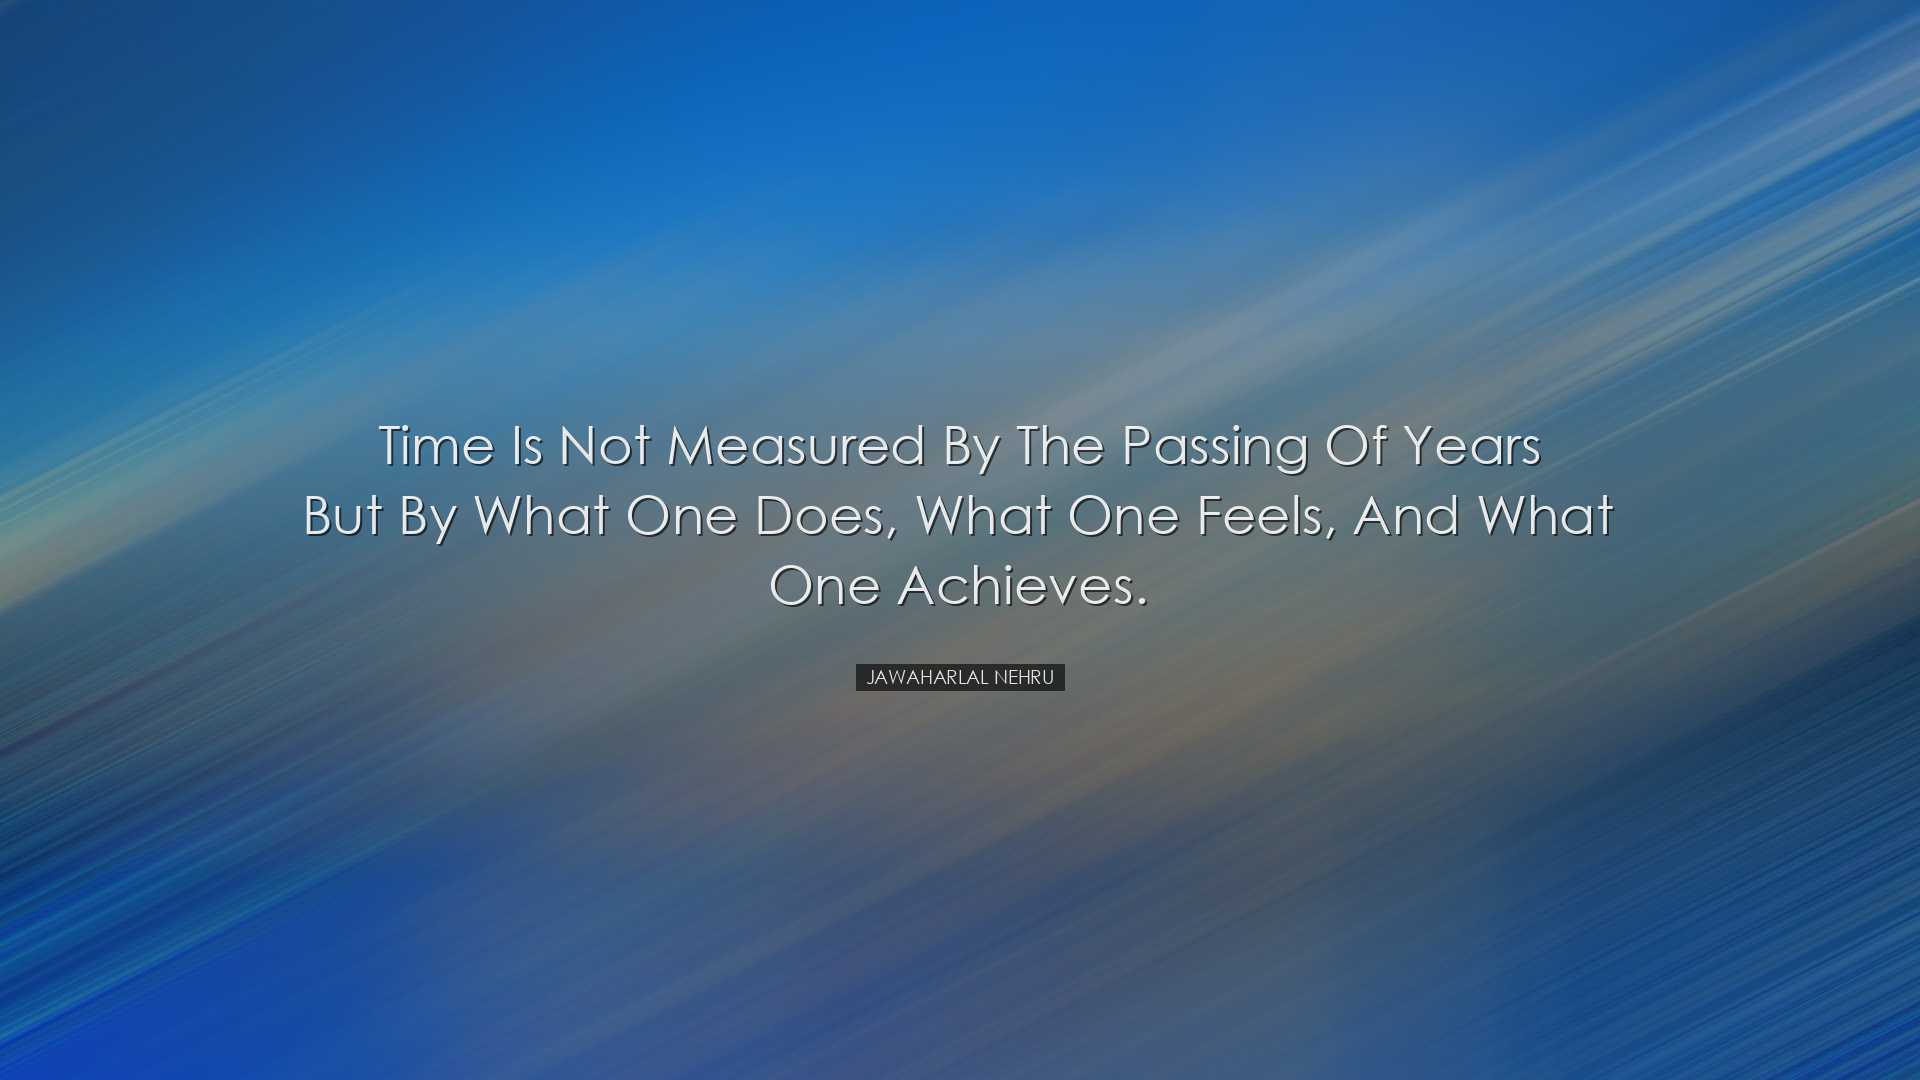 Time is not measured by the passing of years but by what one does,